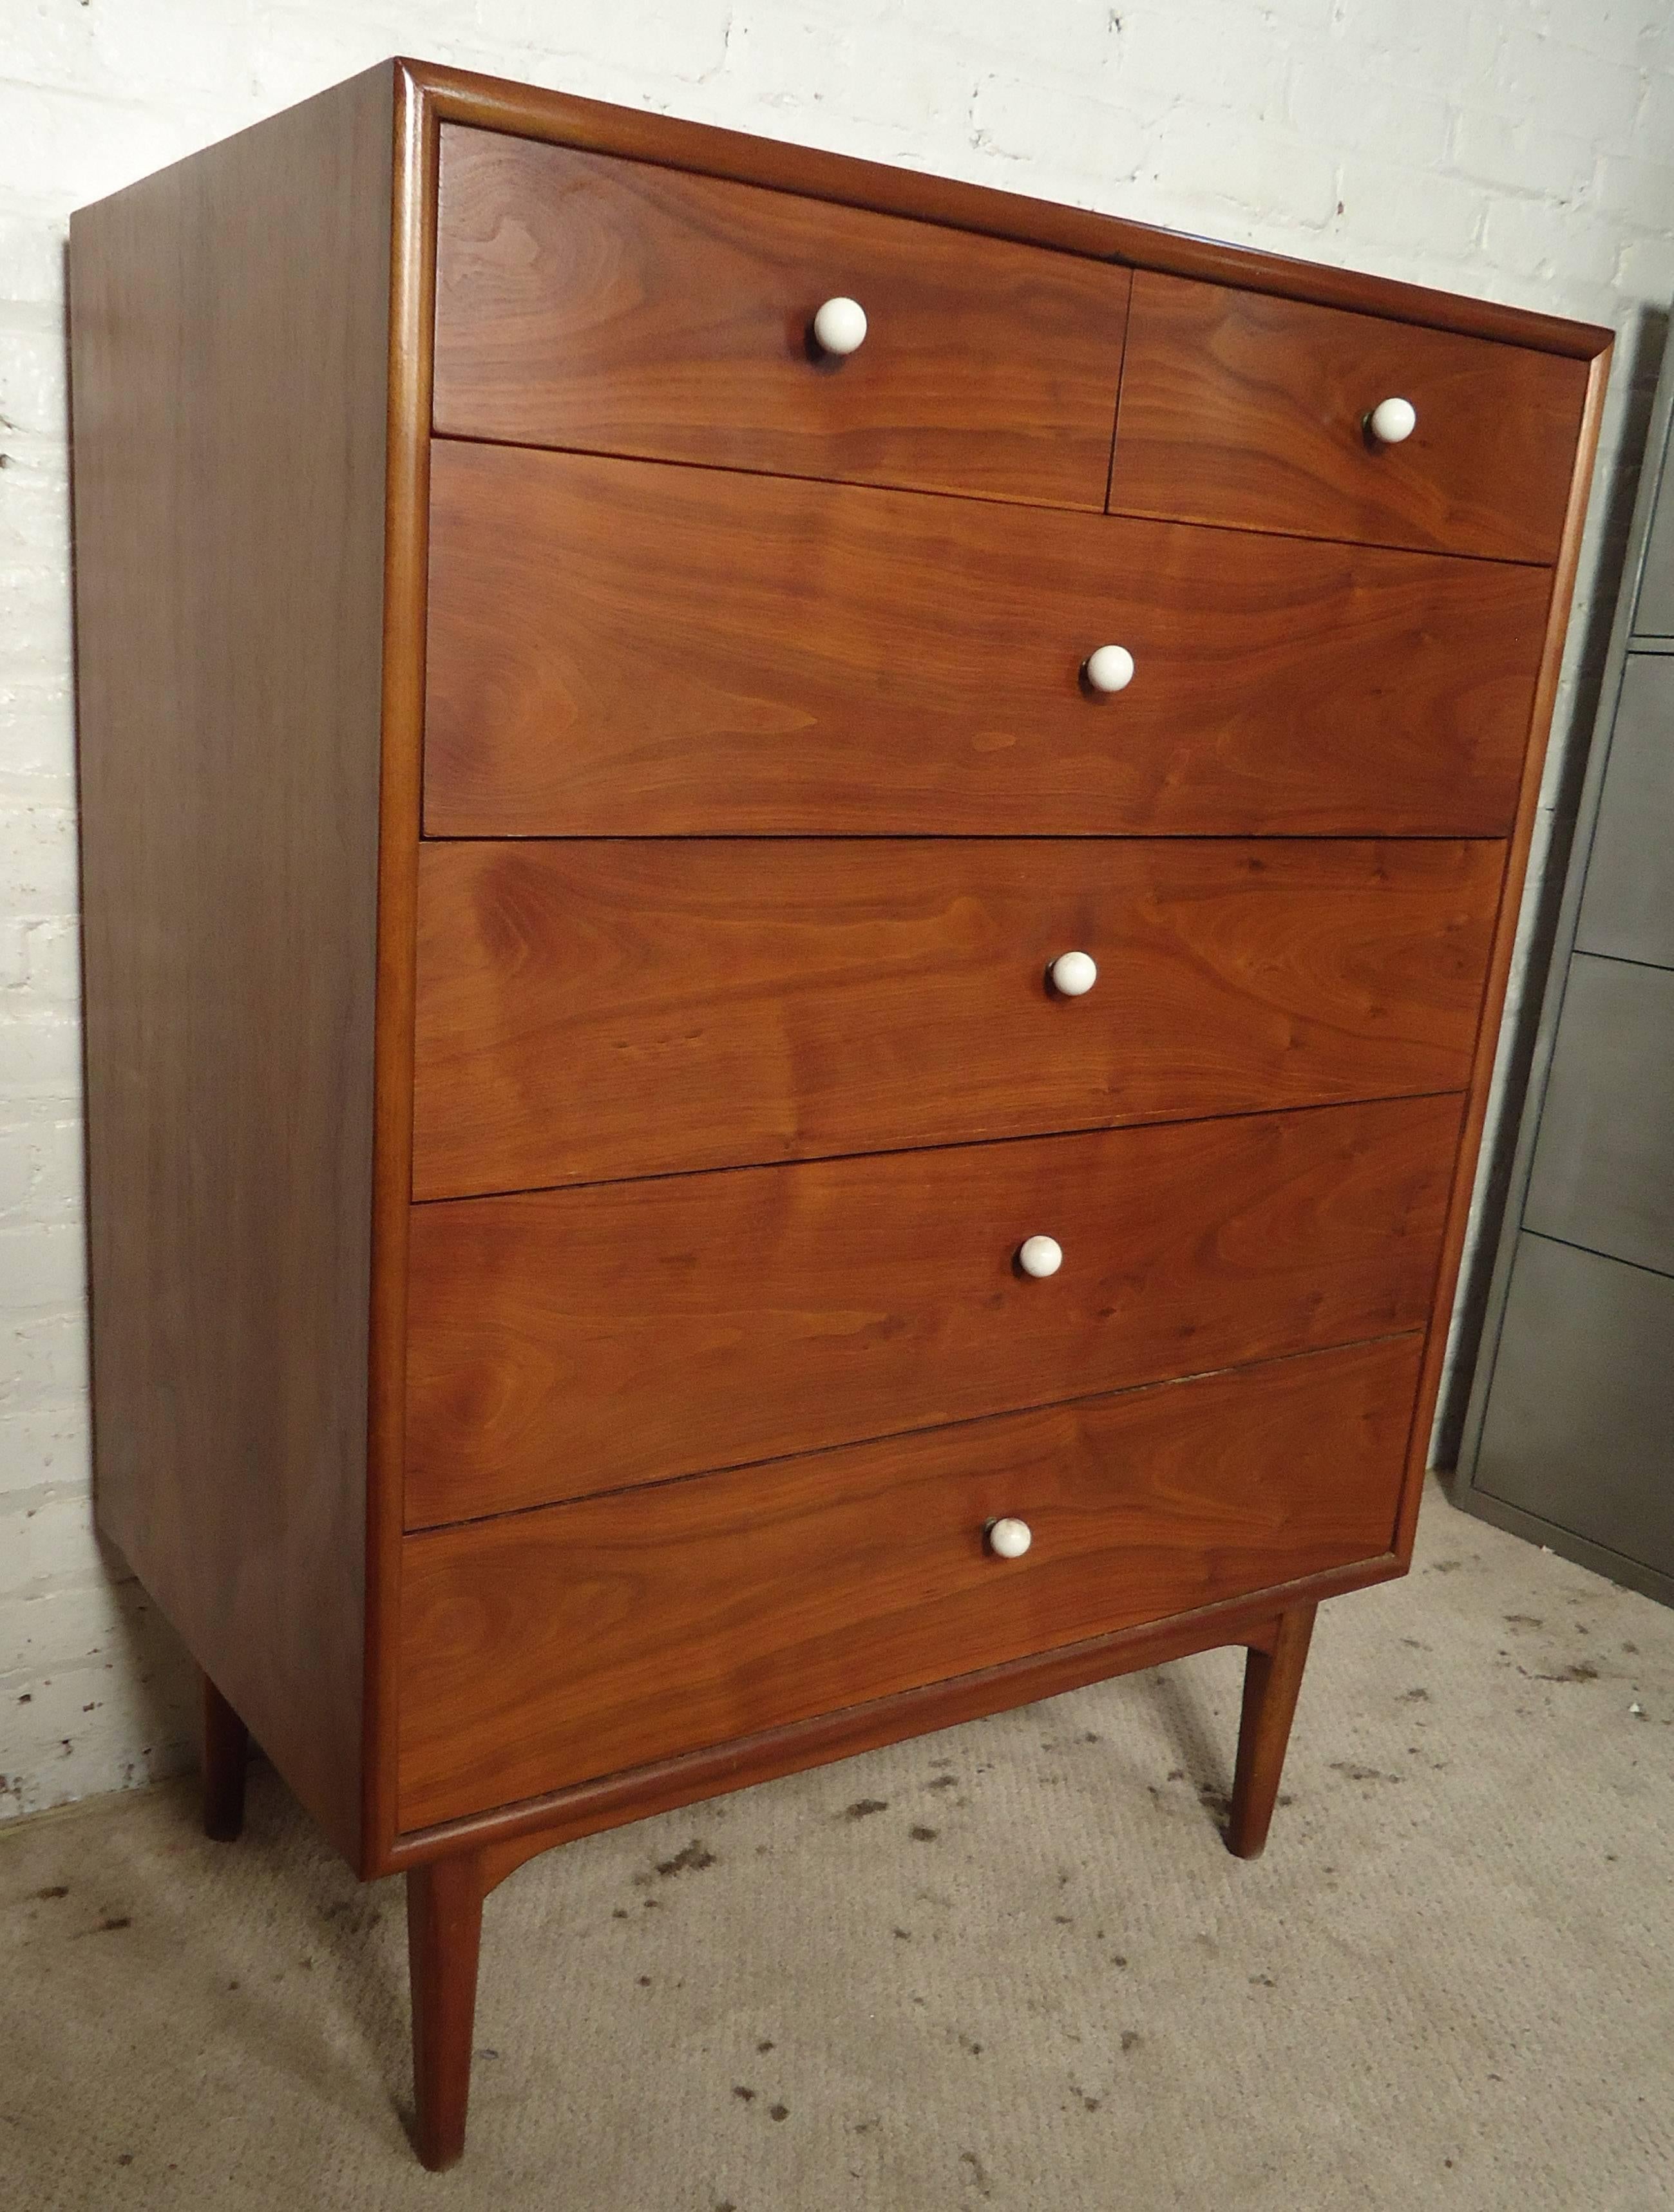 Vintage-modern highboy dresser designed by Kipp Stuart for Drexel, features six drawers and beautiful wood grain.

Please confirm item location NY or NJ with dealer.